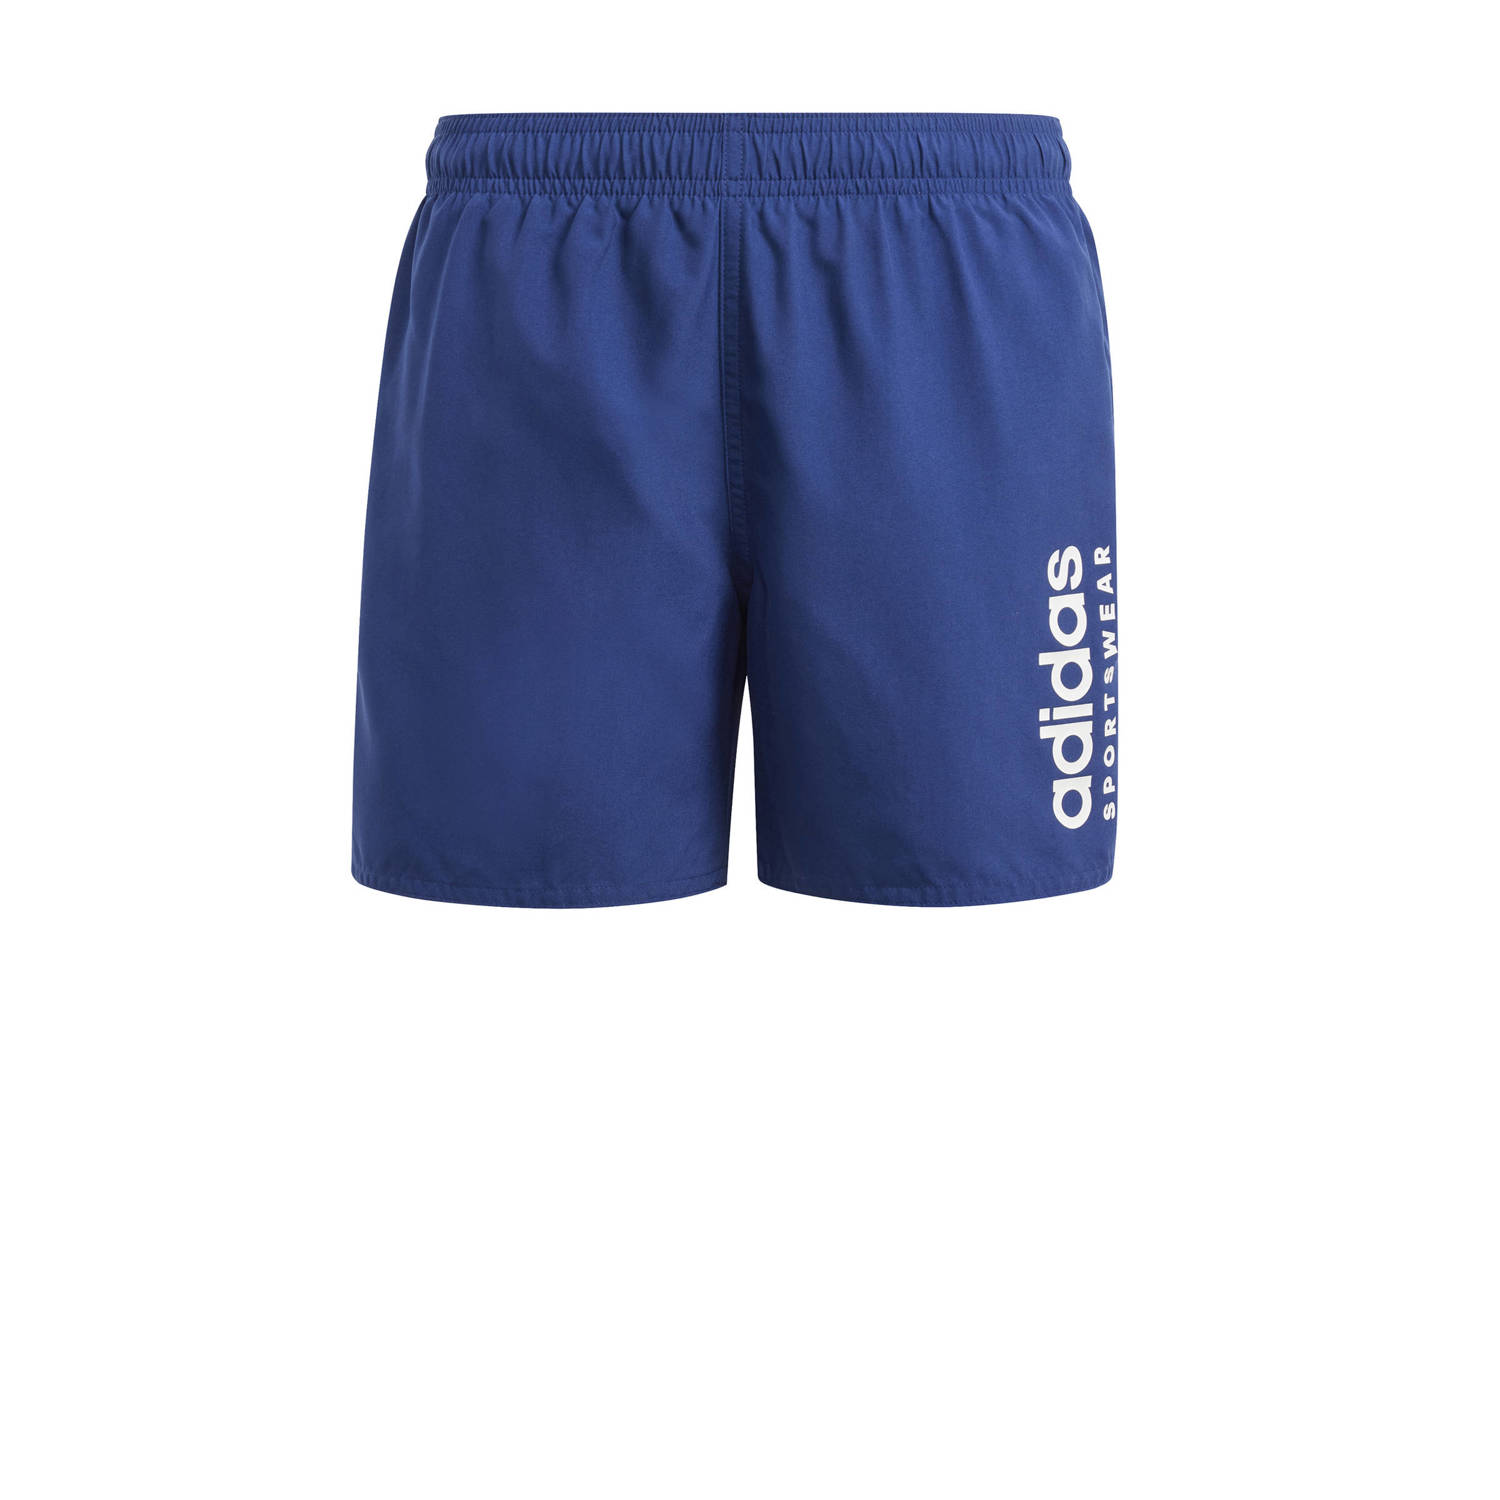 Adidas Perfor ce zwemshort blauw Gerecycled polyester Effen 158